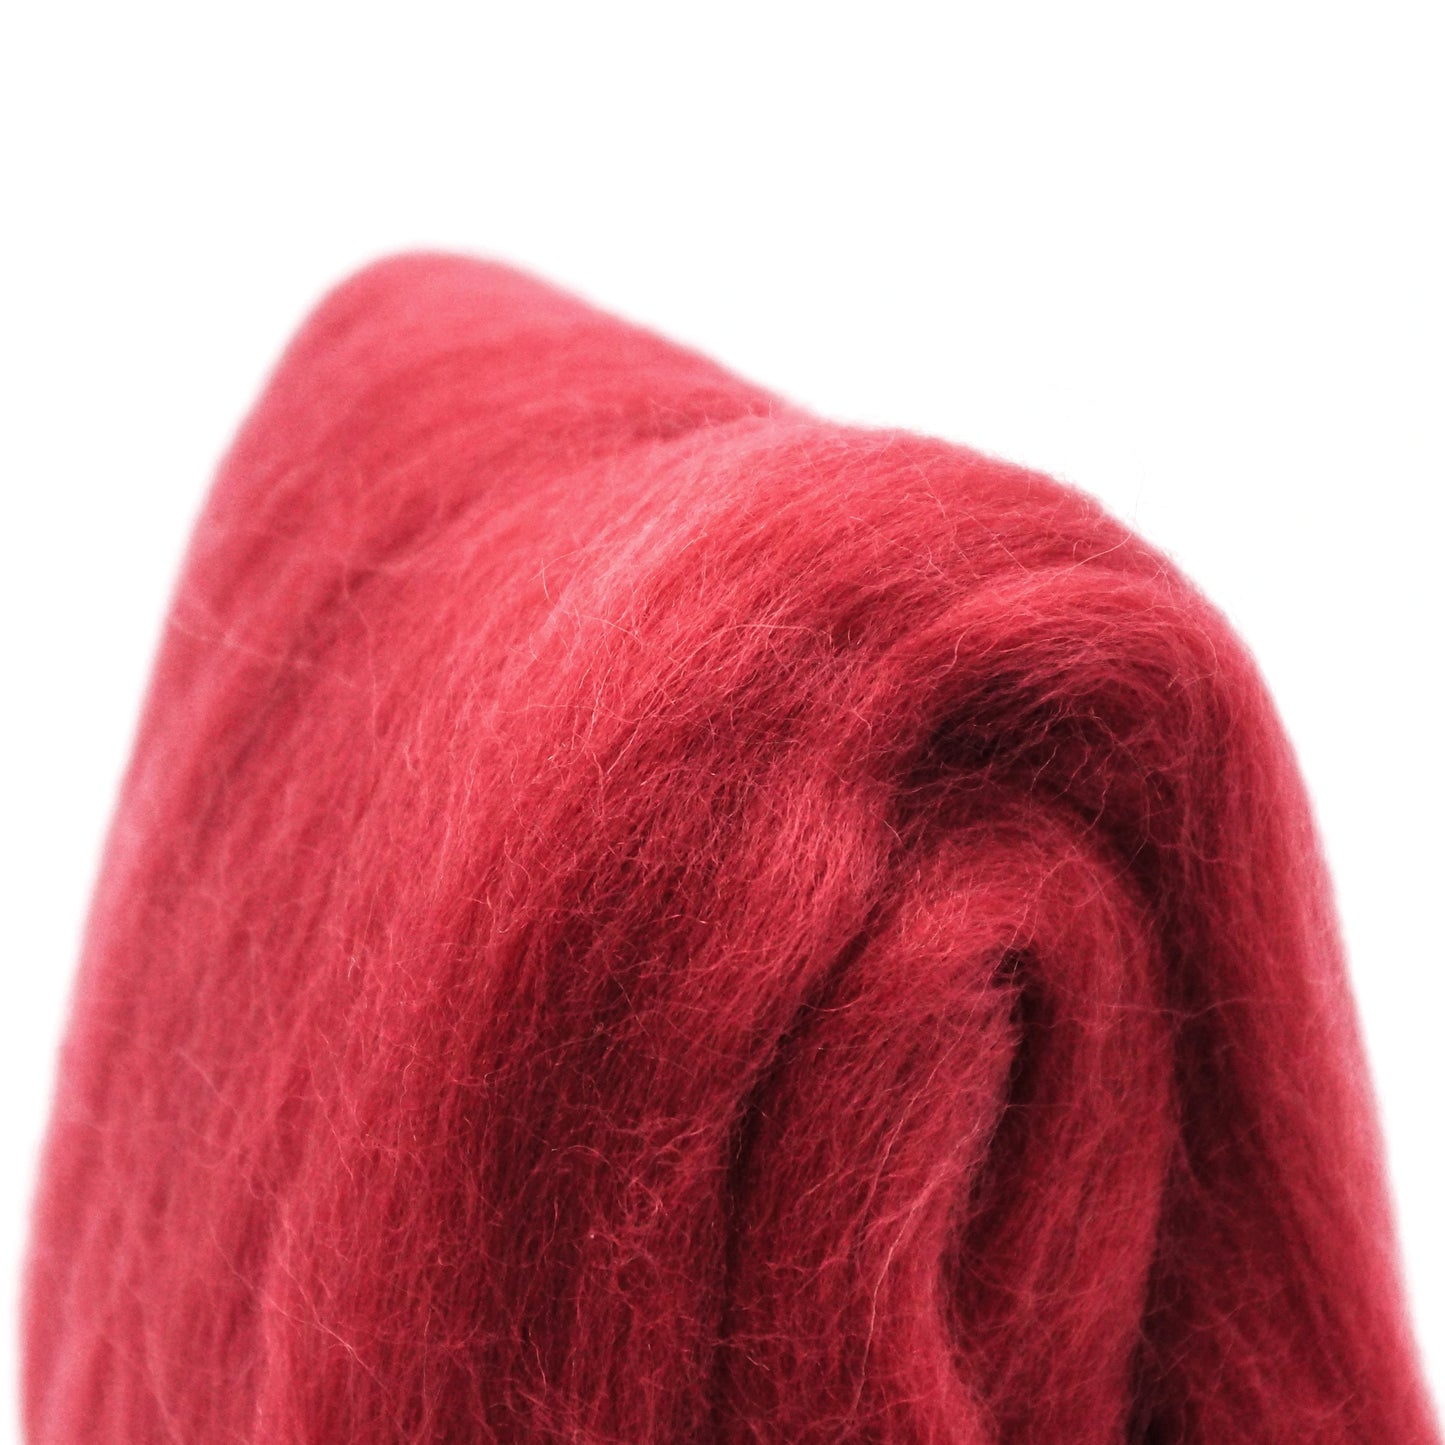 Wool Roving - Red